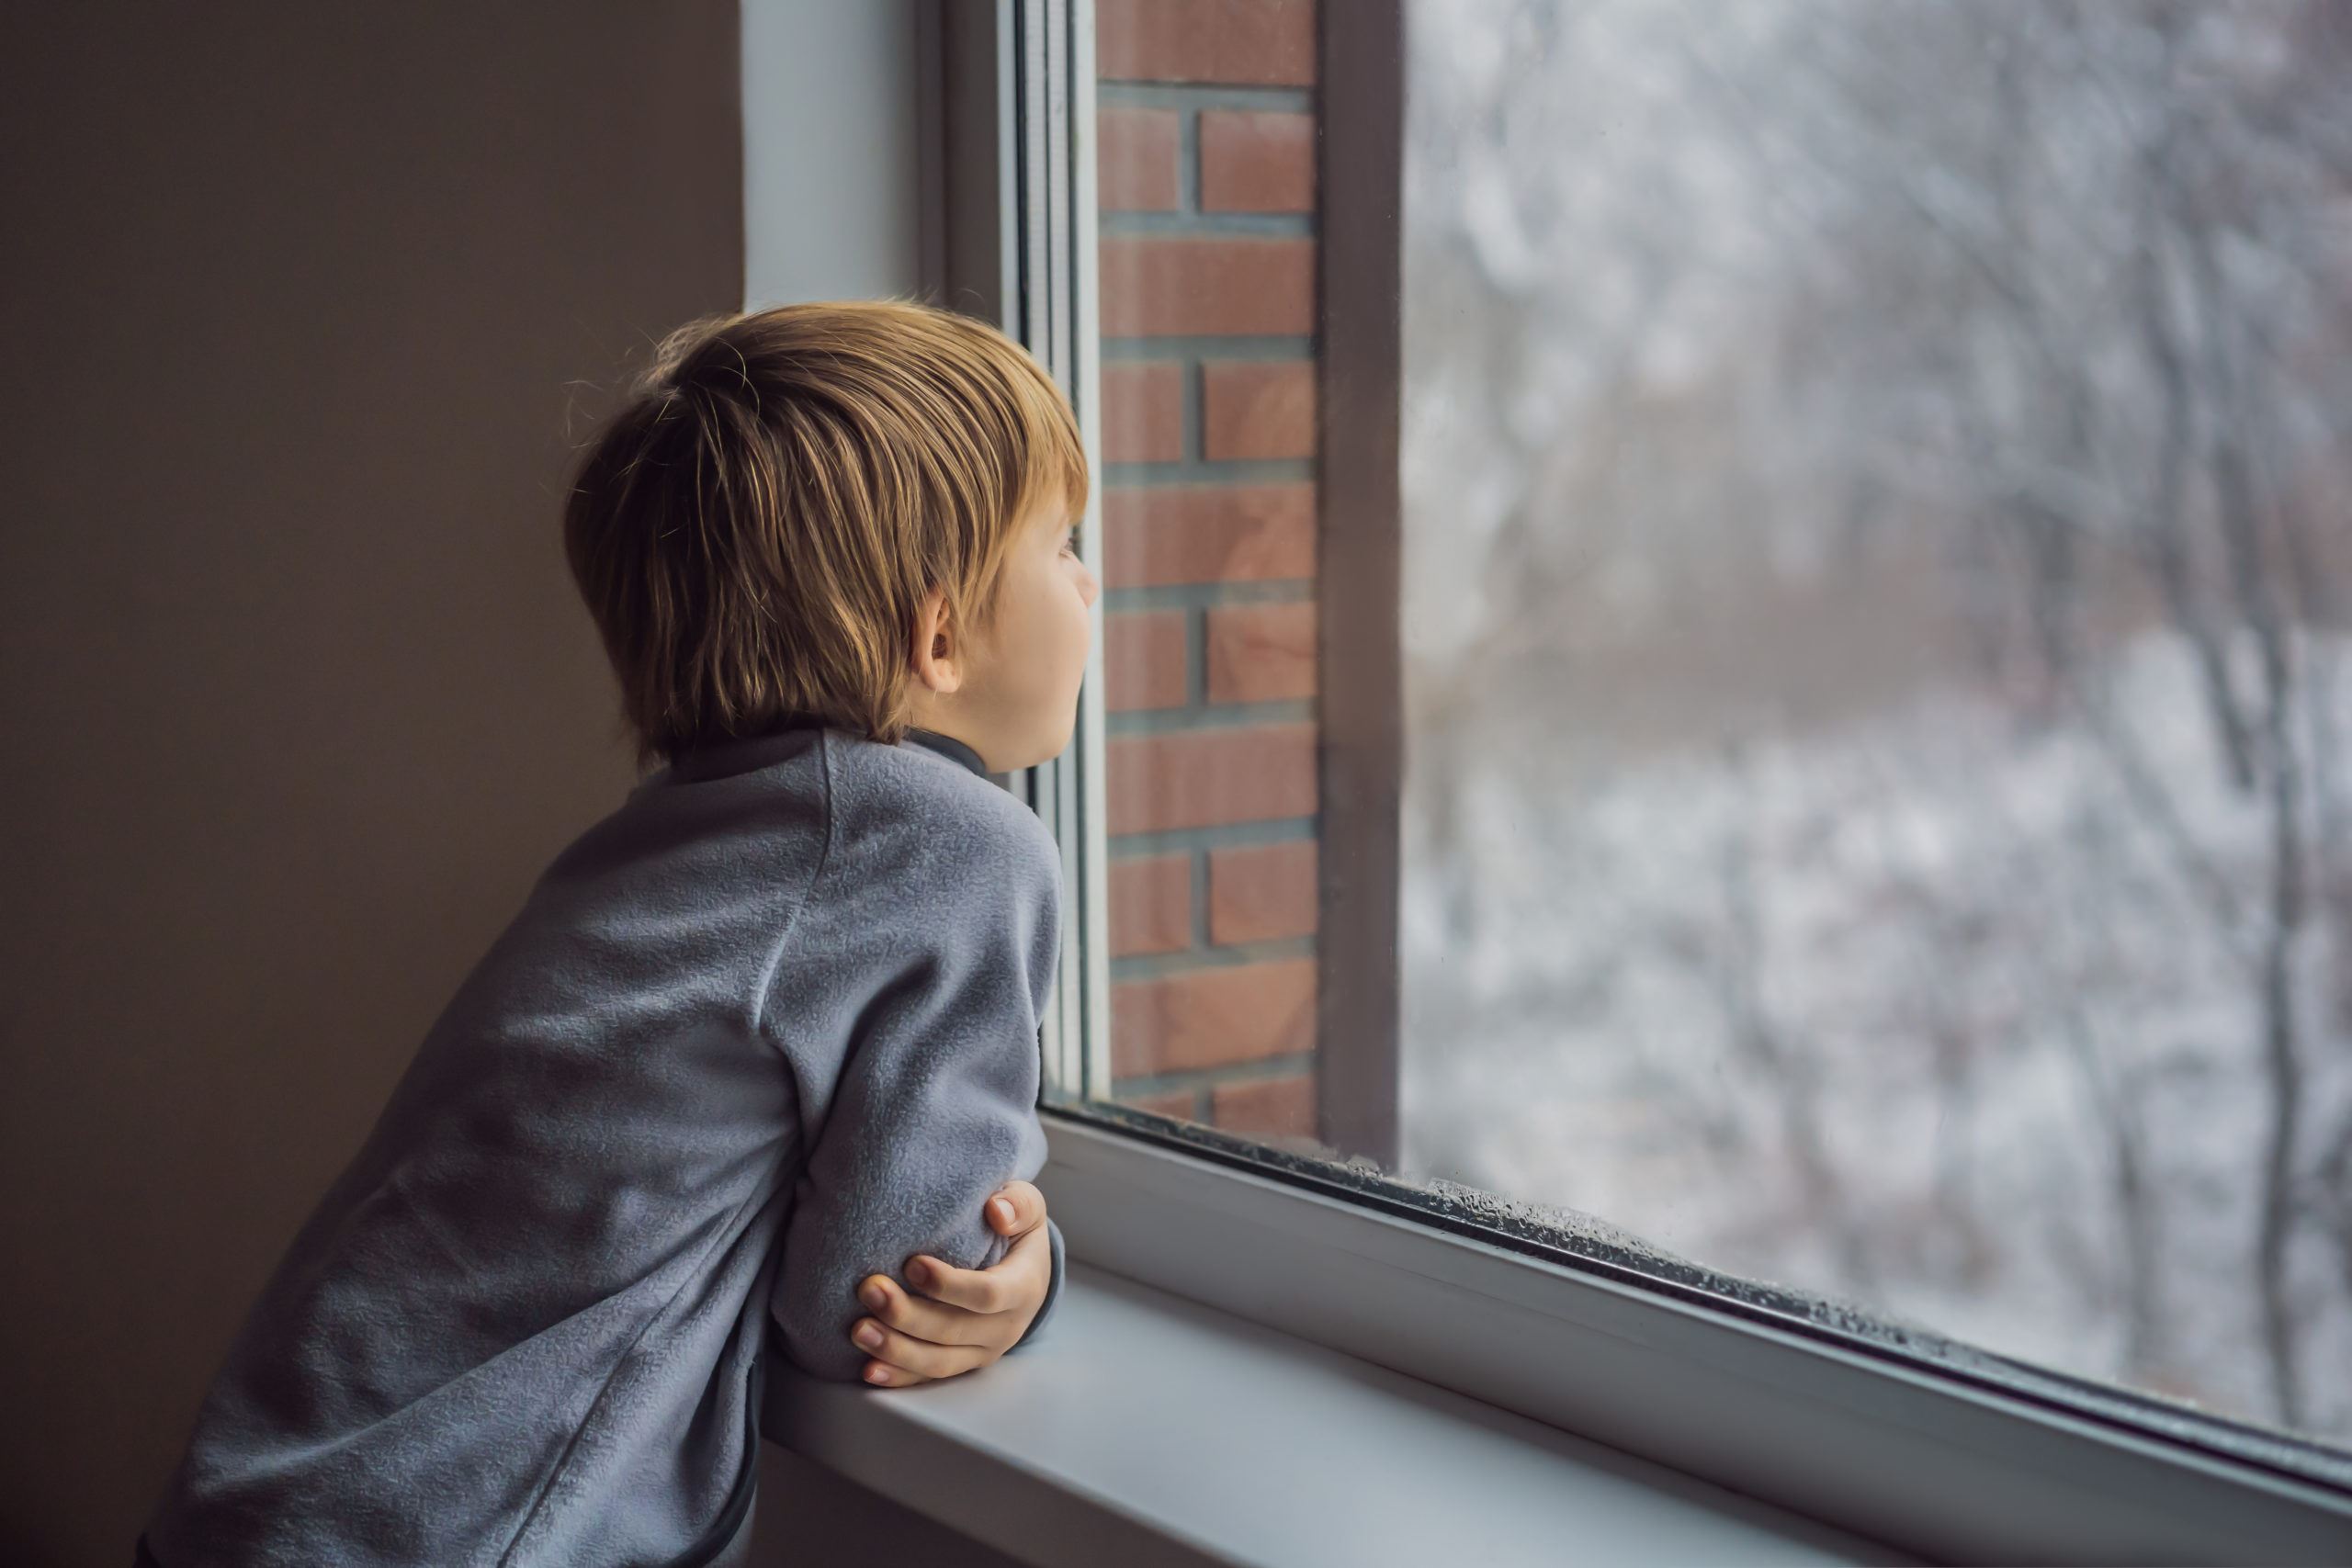 Child looking out a window alone